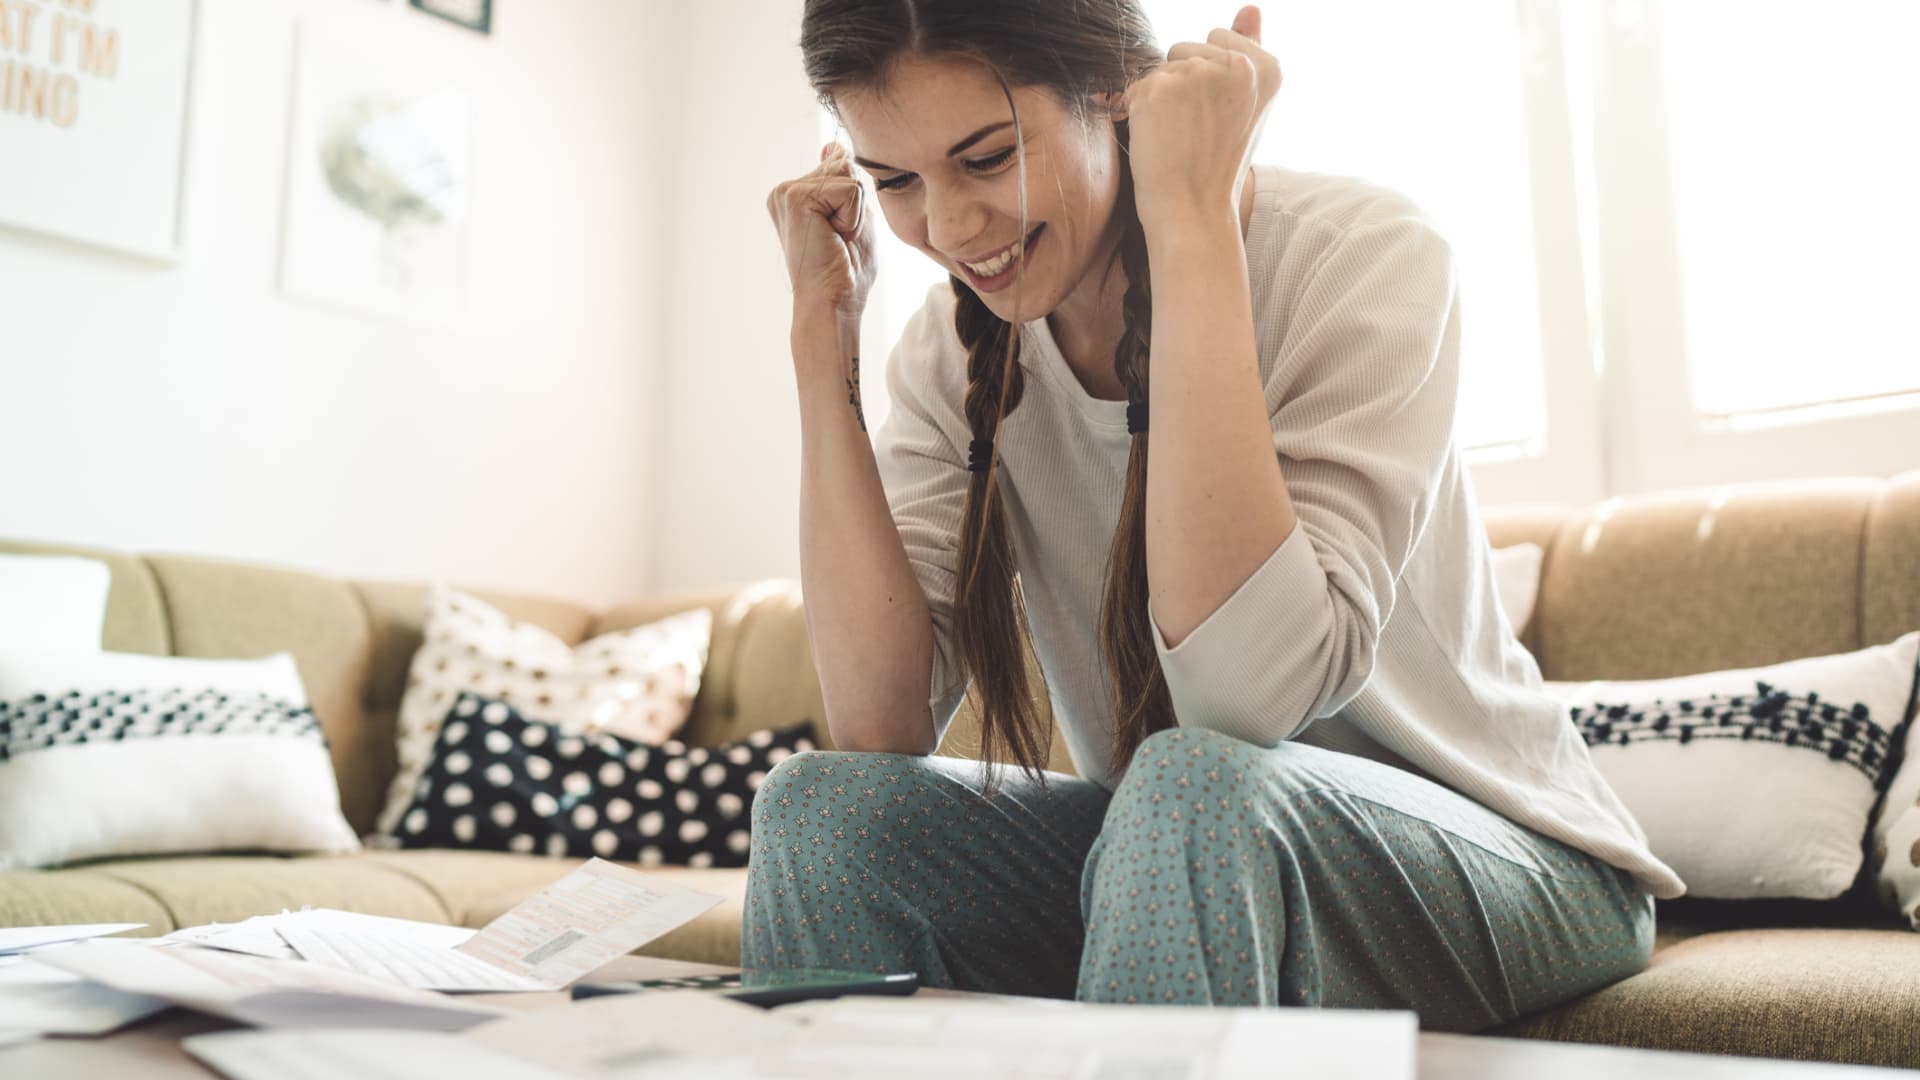 22% of millennials used their stimulus check to pay off credit card debt—here's how that could improve your credit score